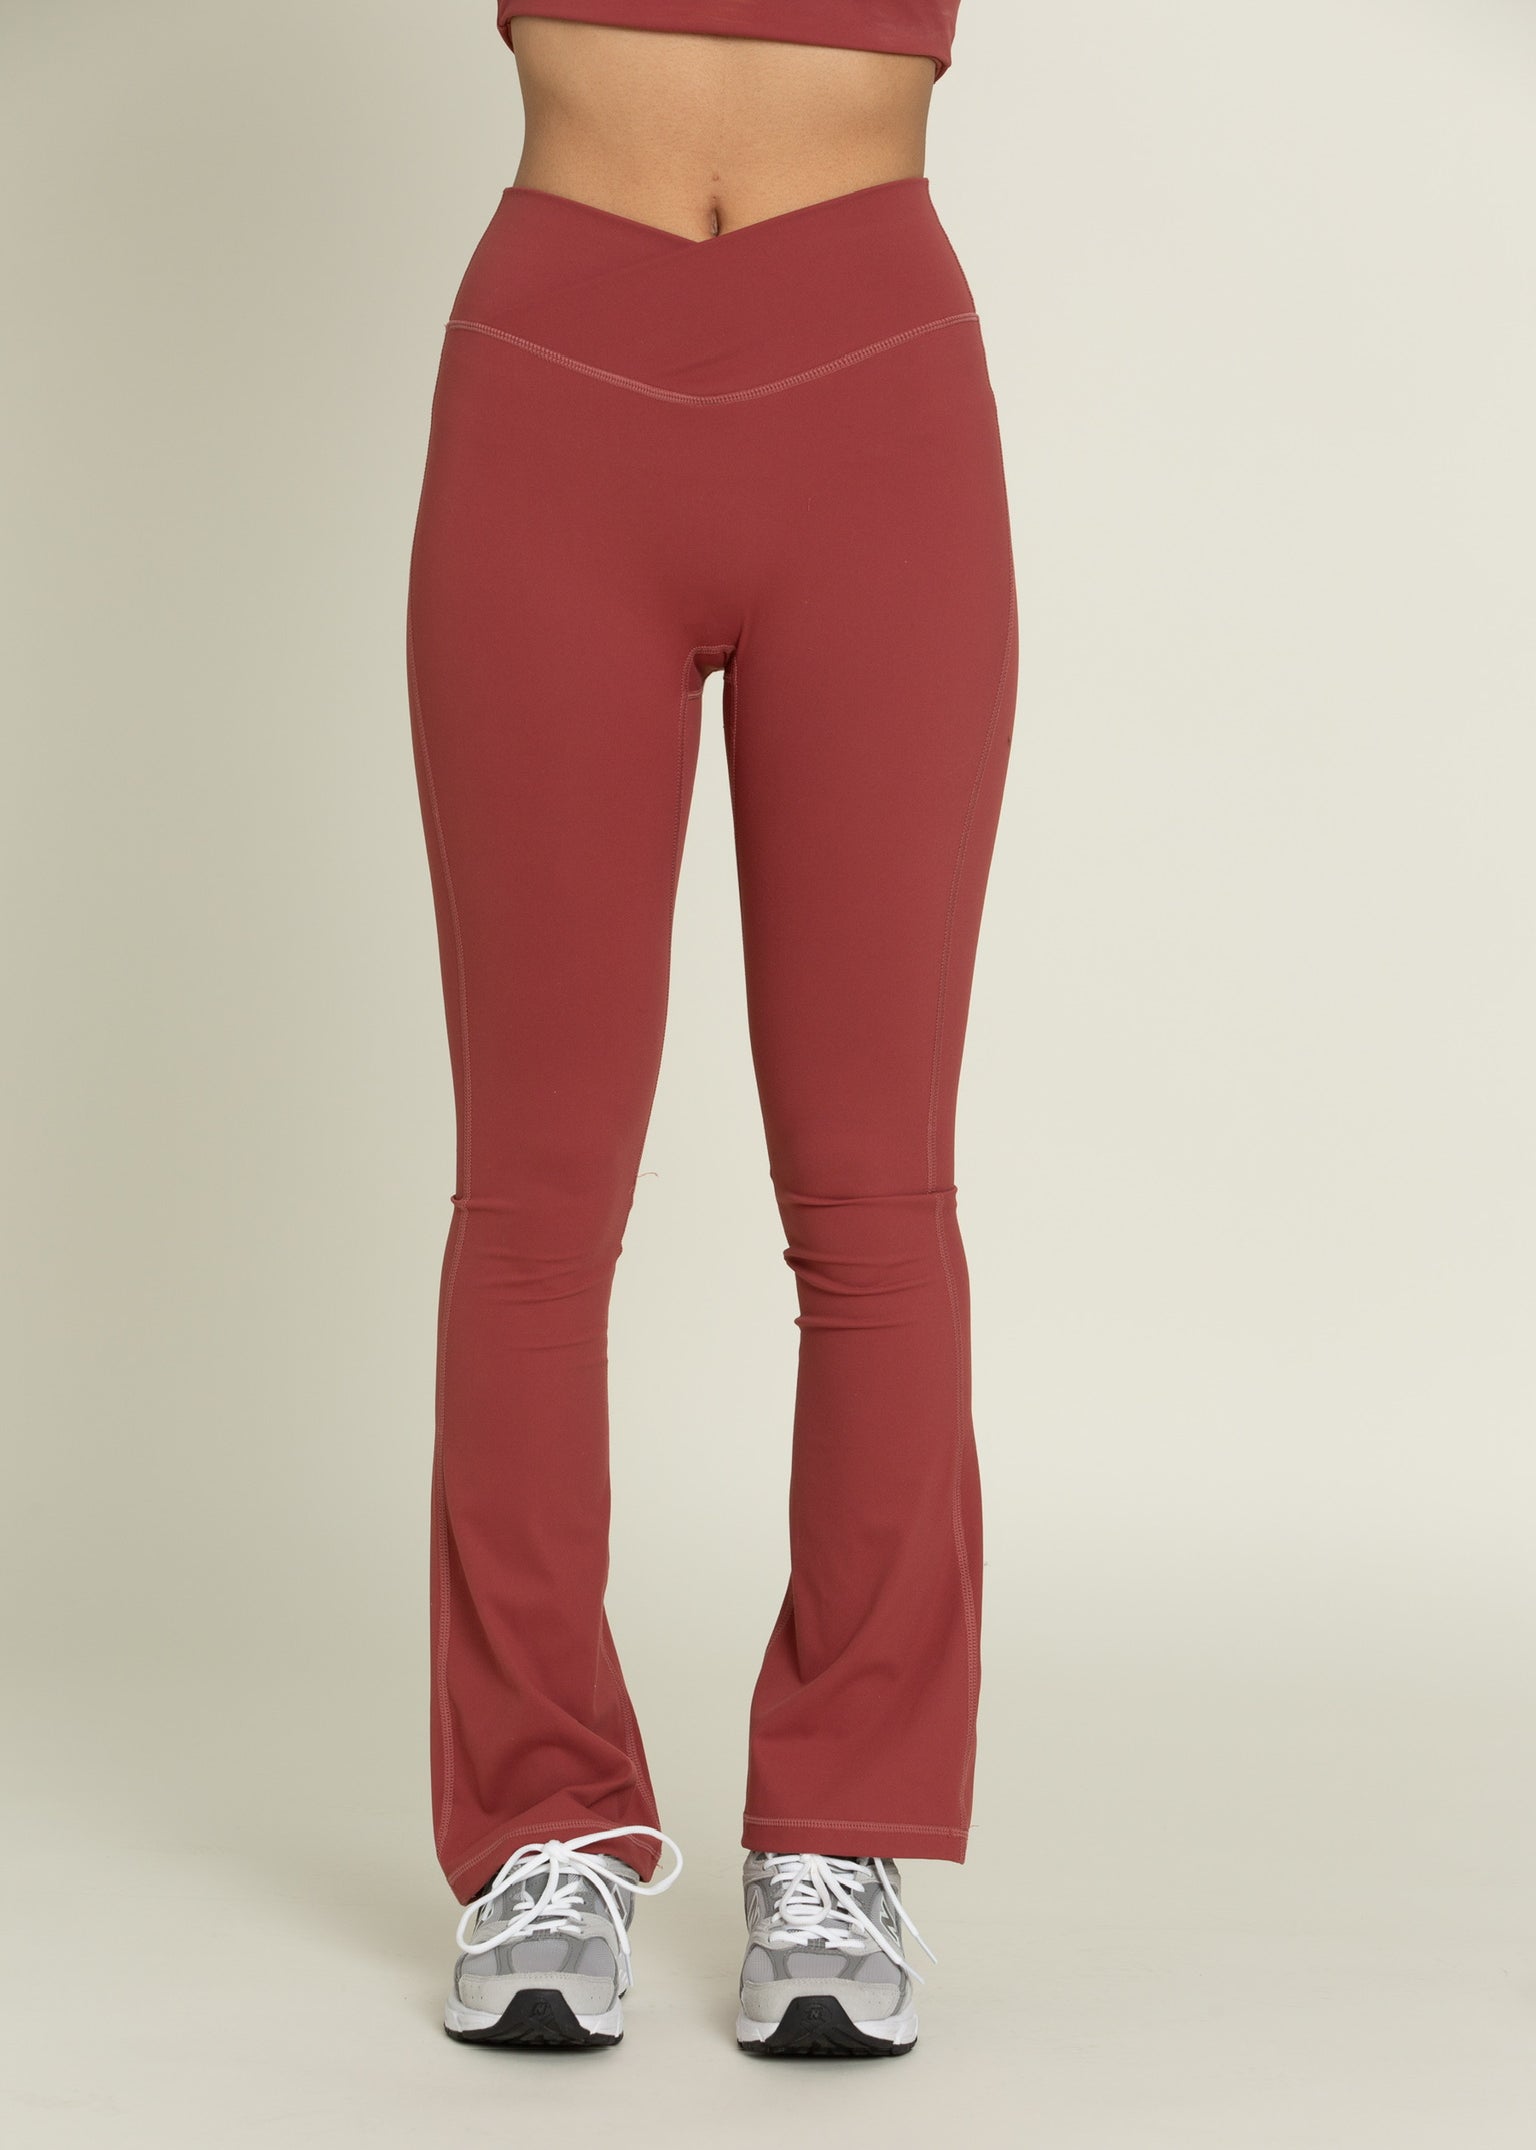 Gold Elite Hot Pink Leggings- Size XL (we have matching top) – The Saved  Collection